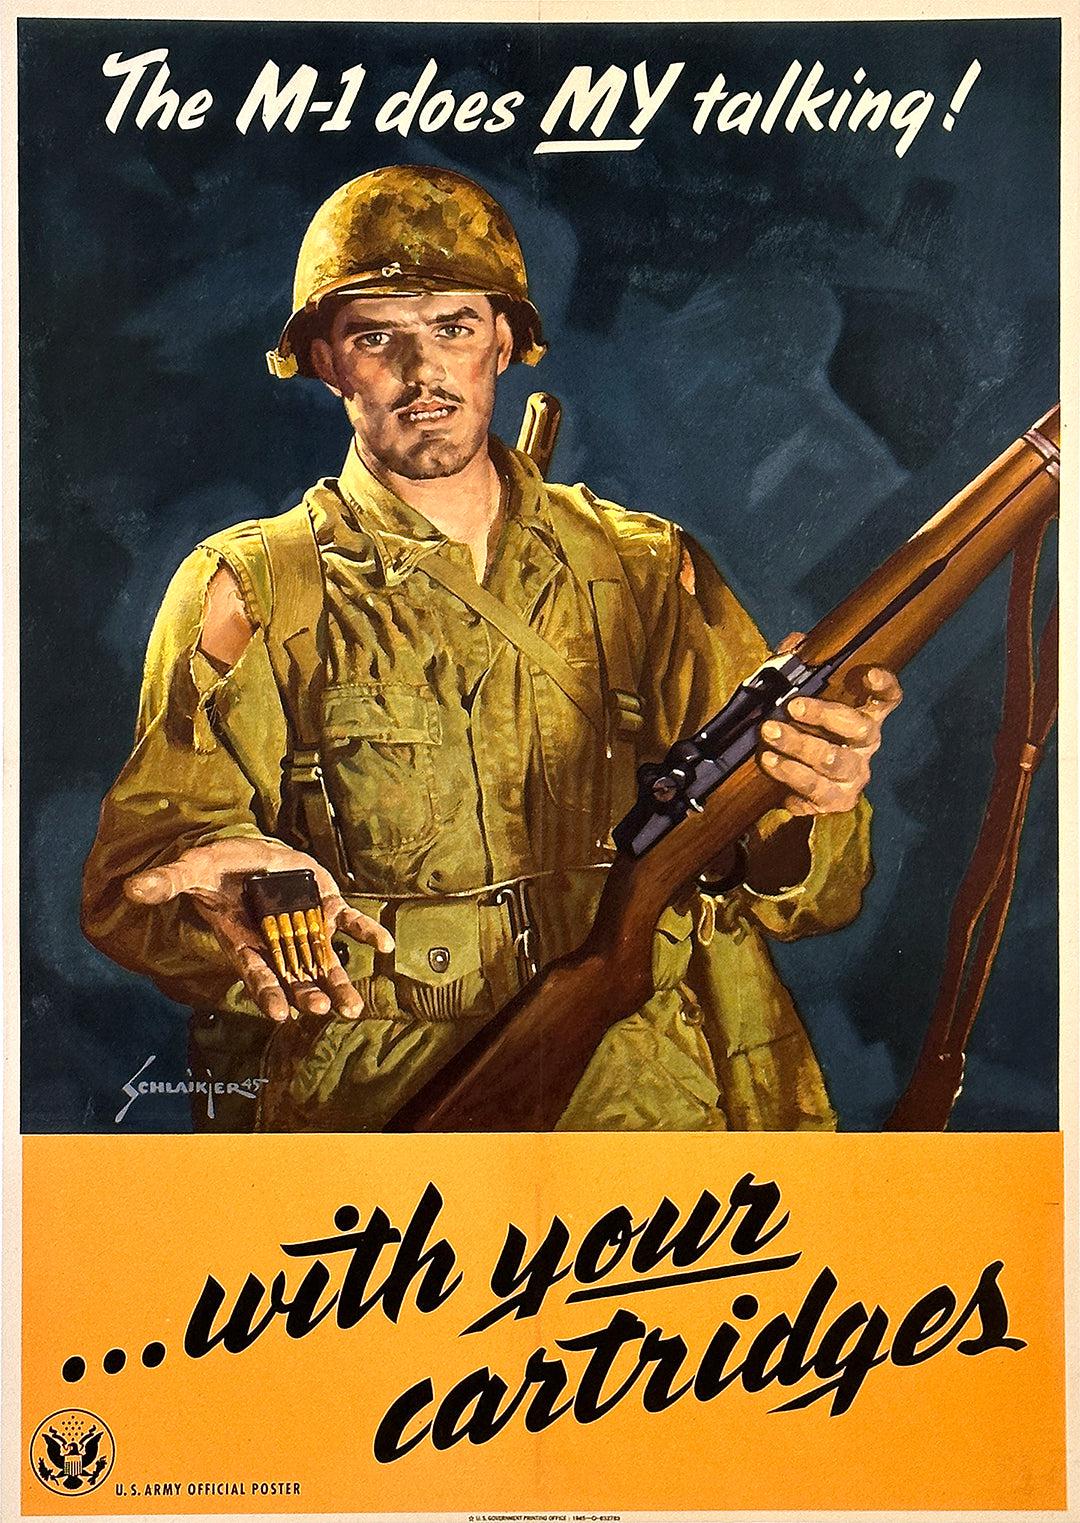 Original Vintage WWII Poster The M1 Does My Talking by Schlaikjer 1945 ...